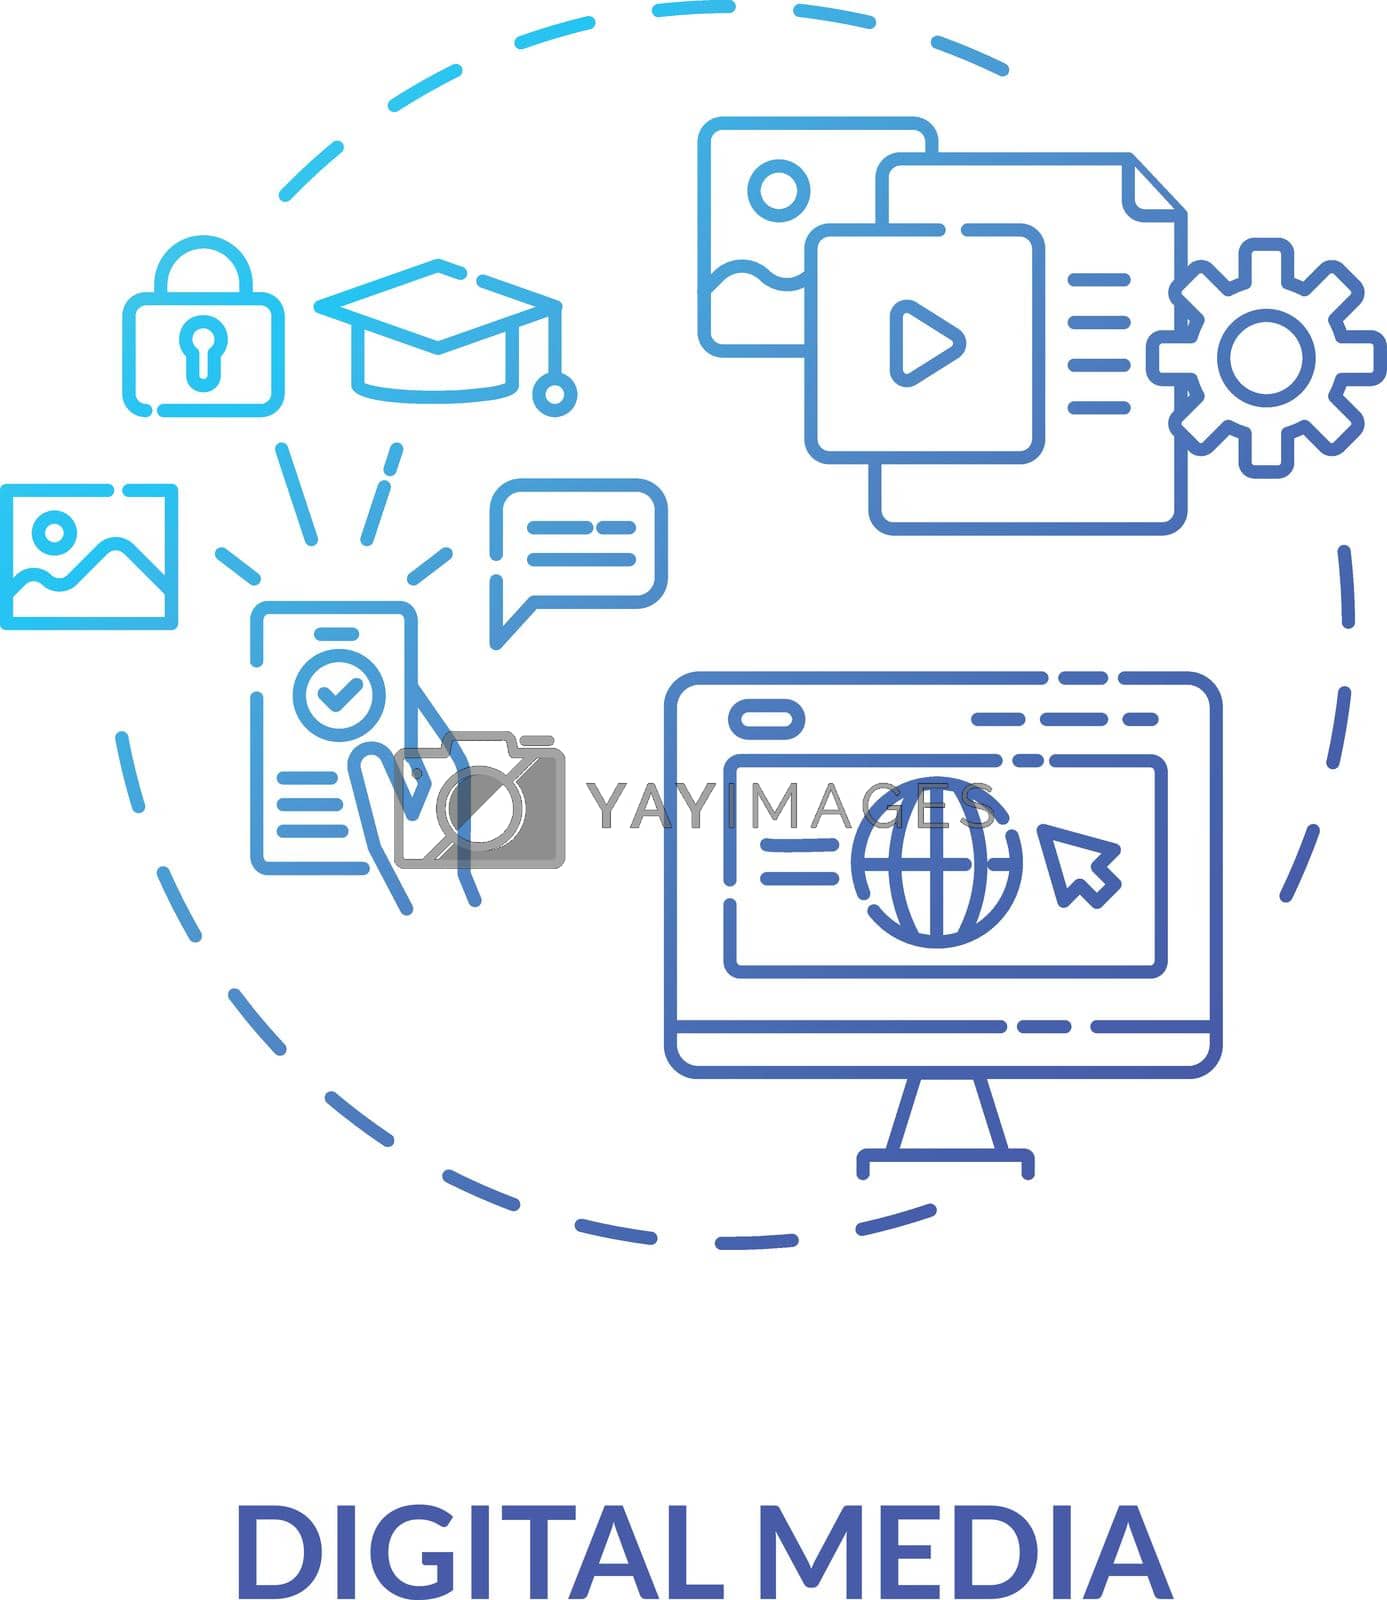 Royalty free image of Digital media concept icon by bsd